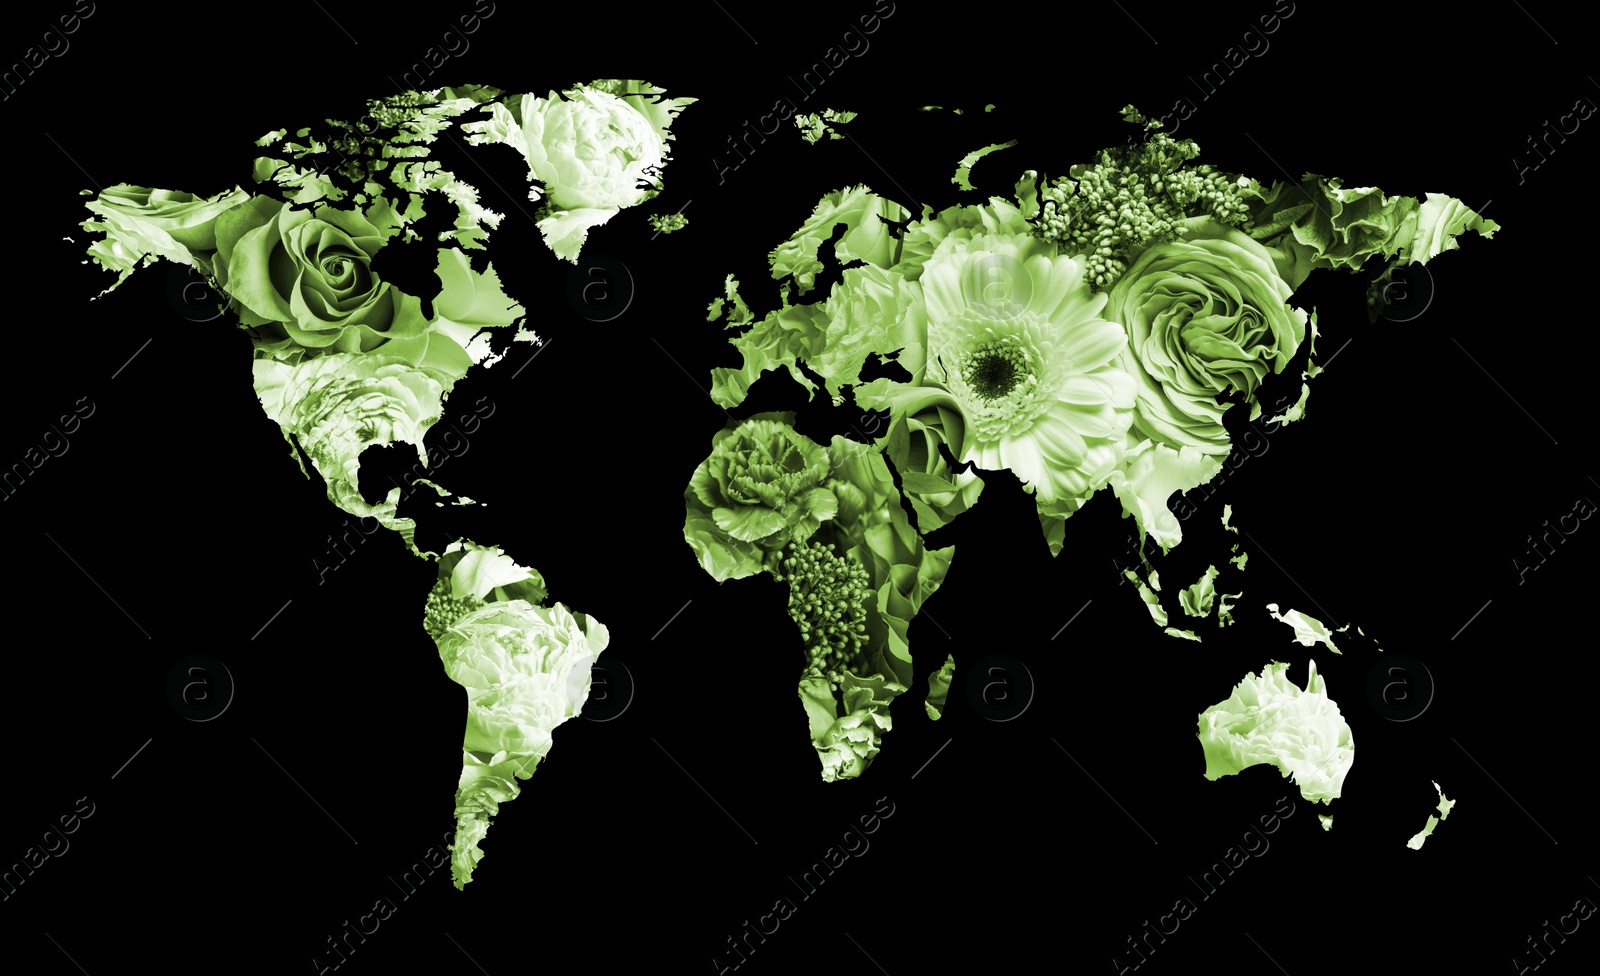 Image of World map made of beautiful flowers on black background, banner design